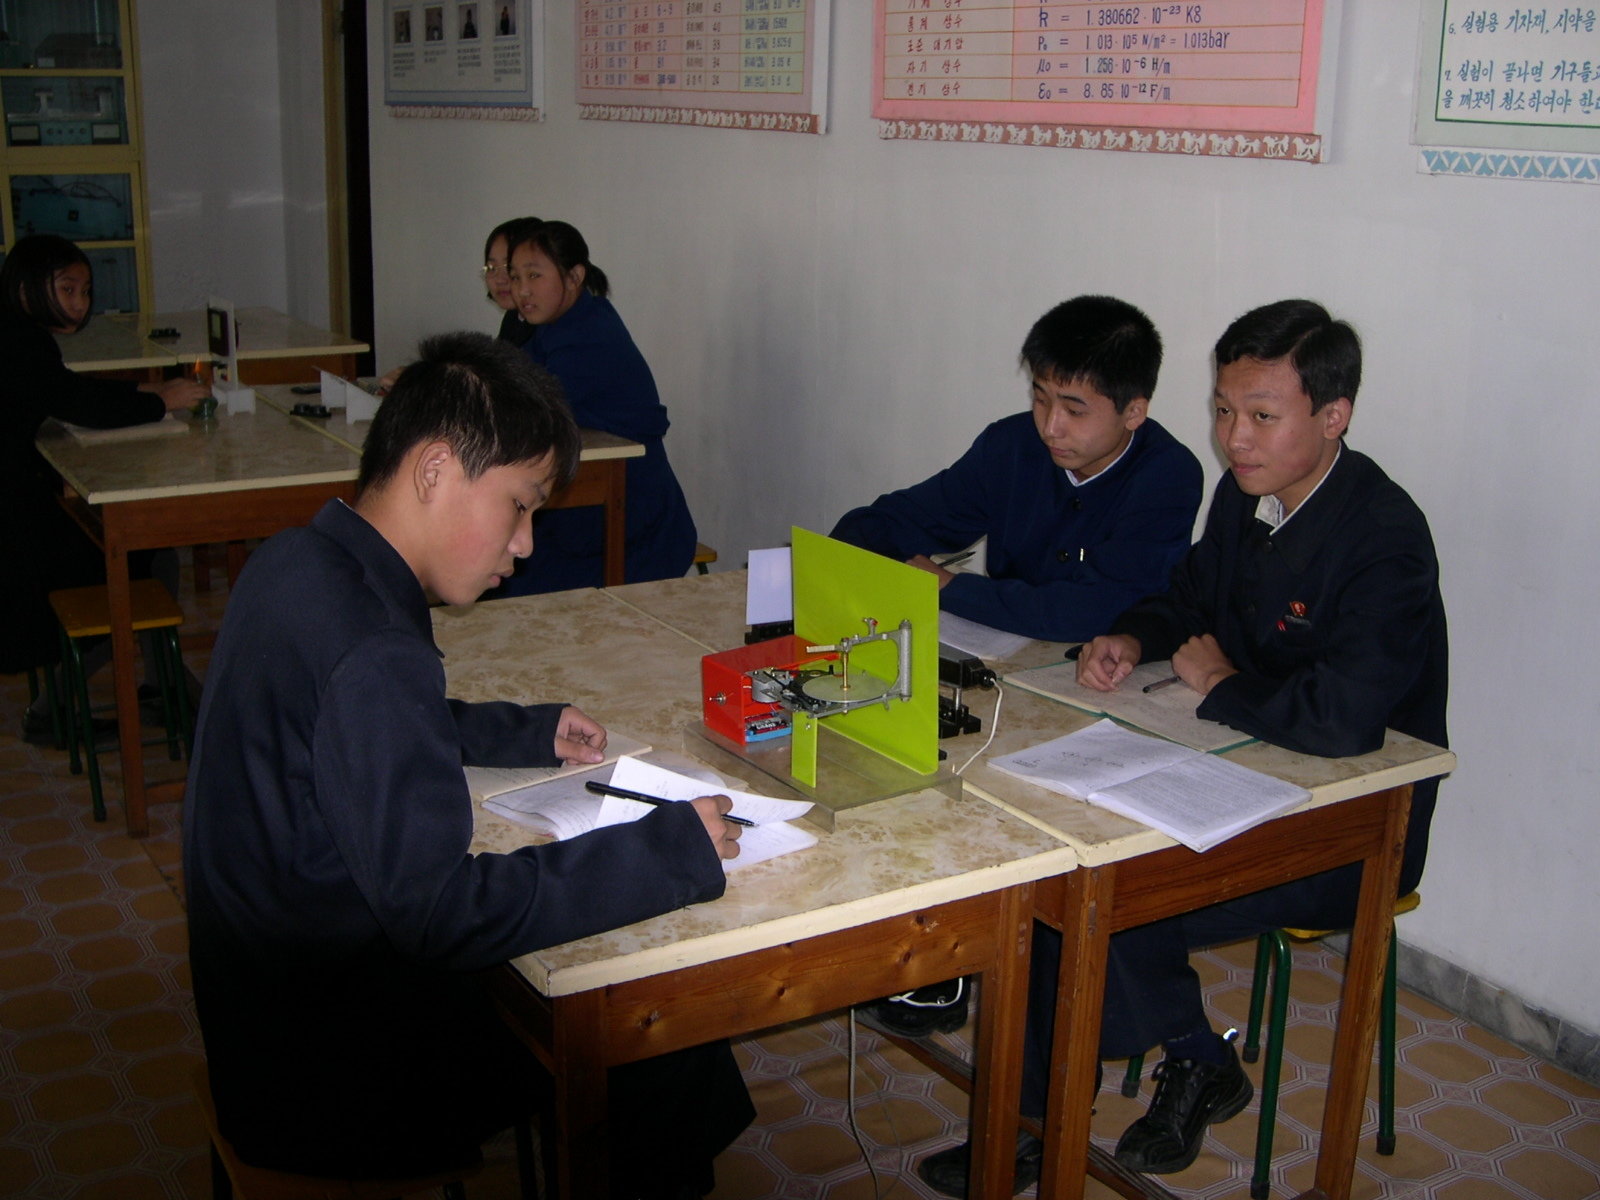 Three uniformed students at a desk busy with a physics tabletop installation